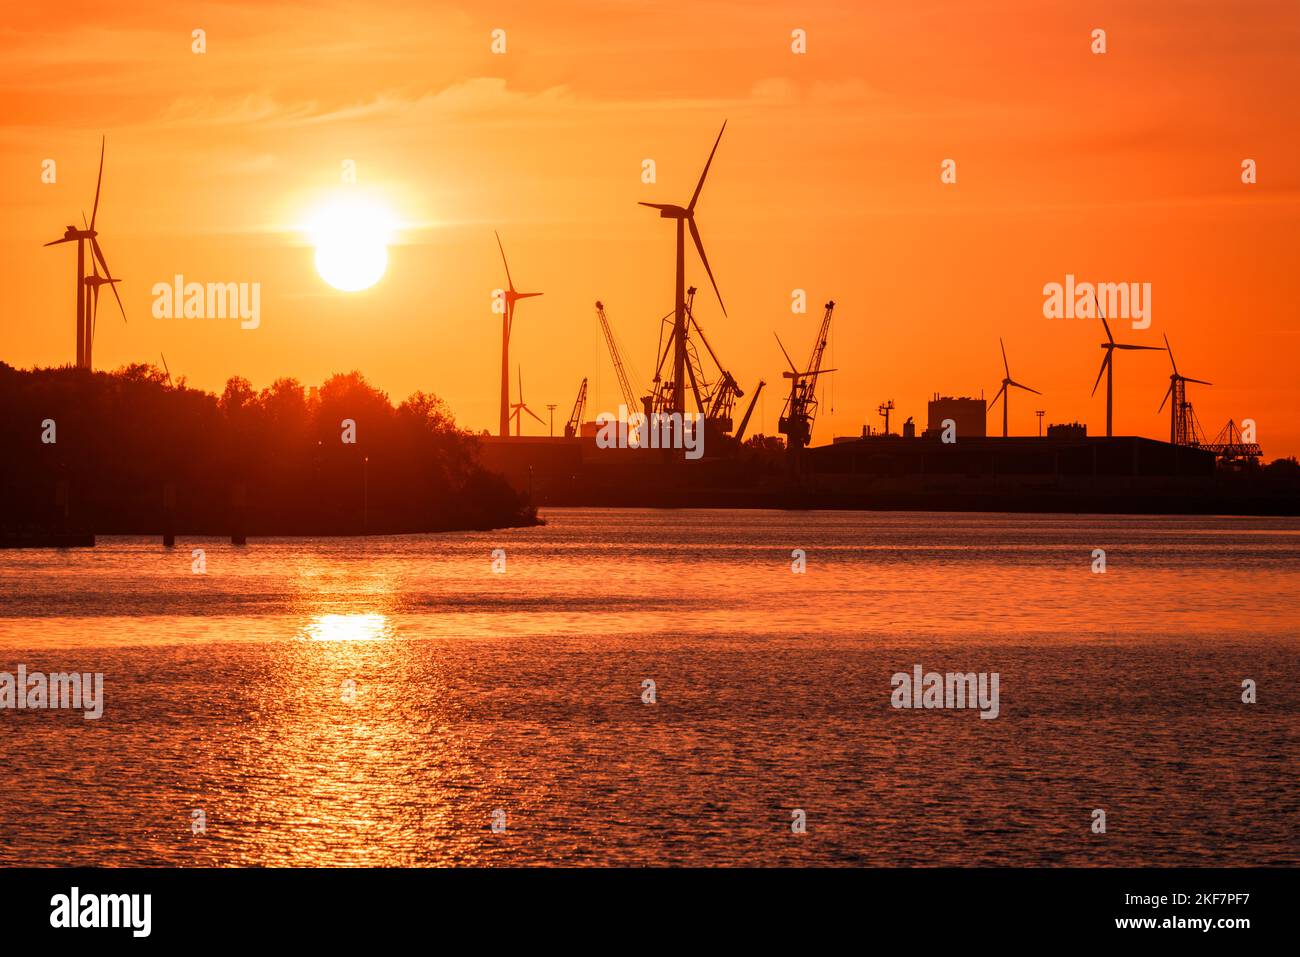 Industrial buildings along with wind turbines and dock cranes on a river harbour silhouetted against a fiery sky at sunset Stock Photo